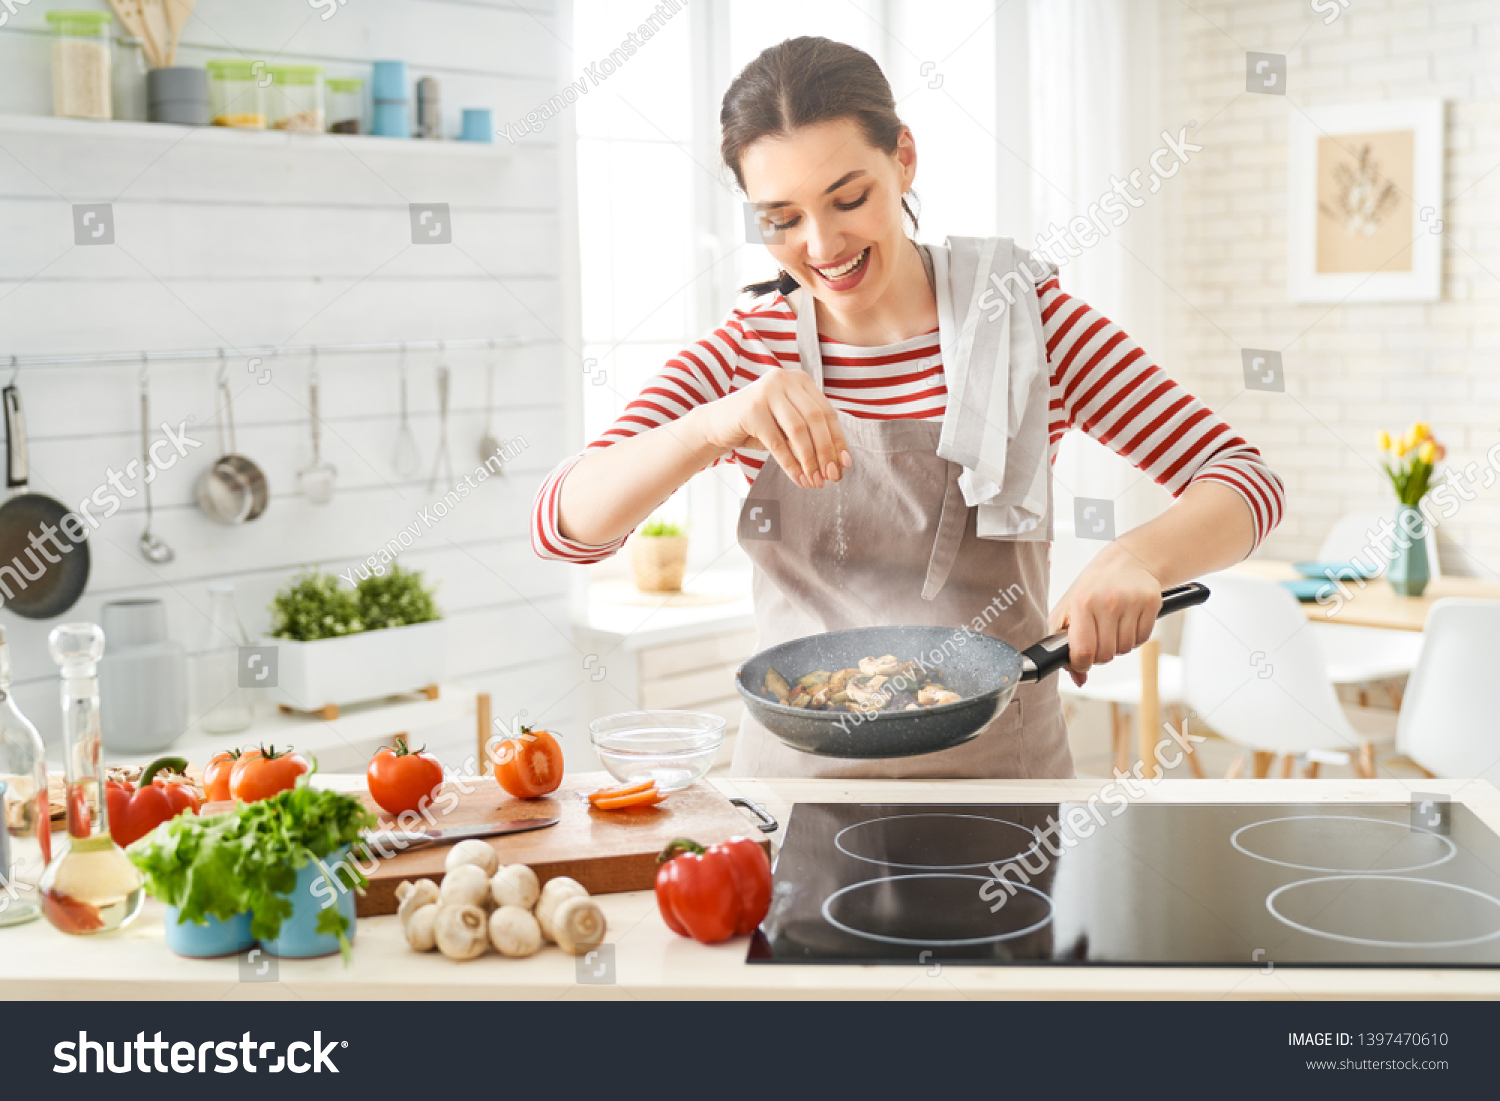 Healthy food at home. Happy woman is preparing the proper meal in the kitchen. #1397470610